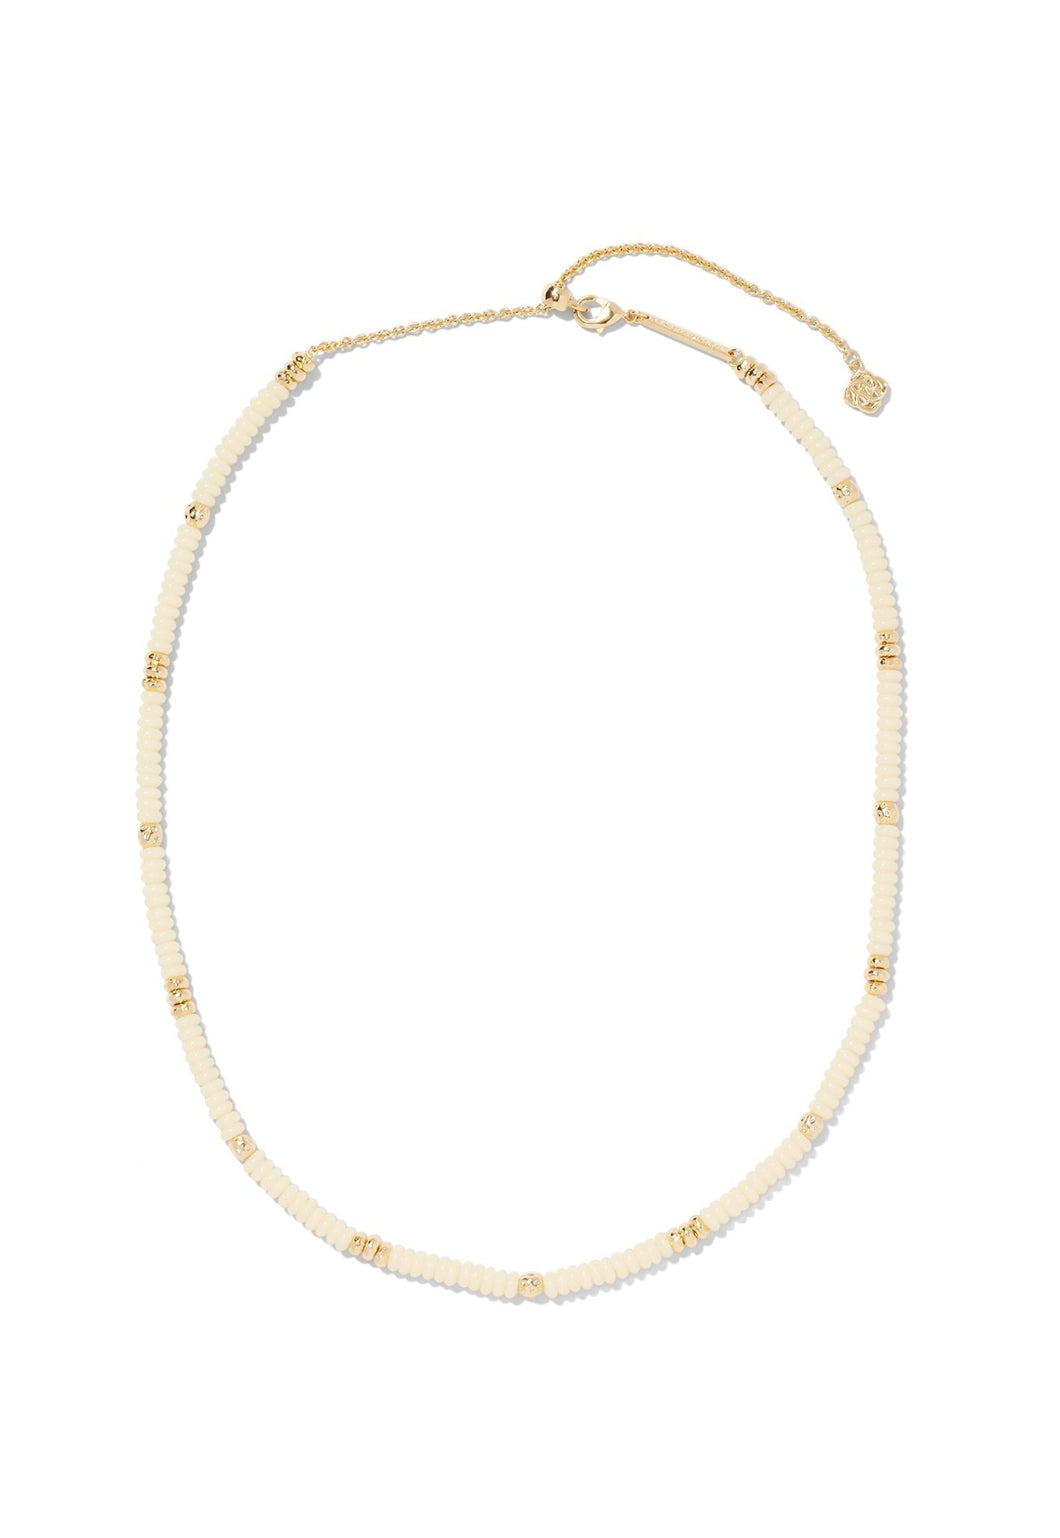 Kendra Scott: Deliah Strand Necklace in Gold Ivory MOP